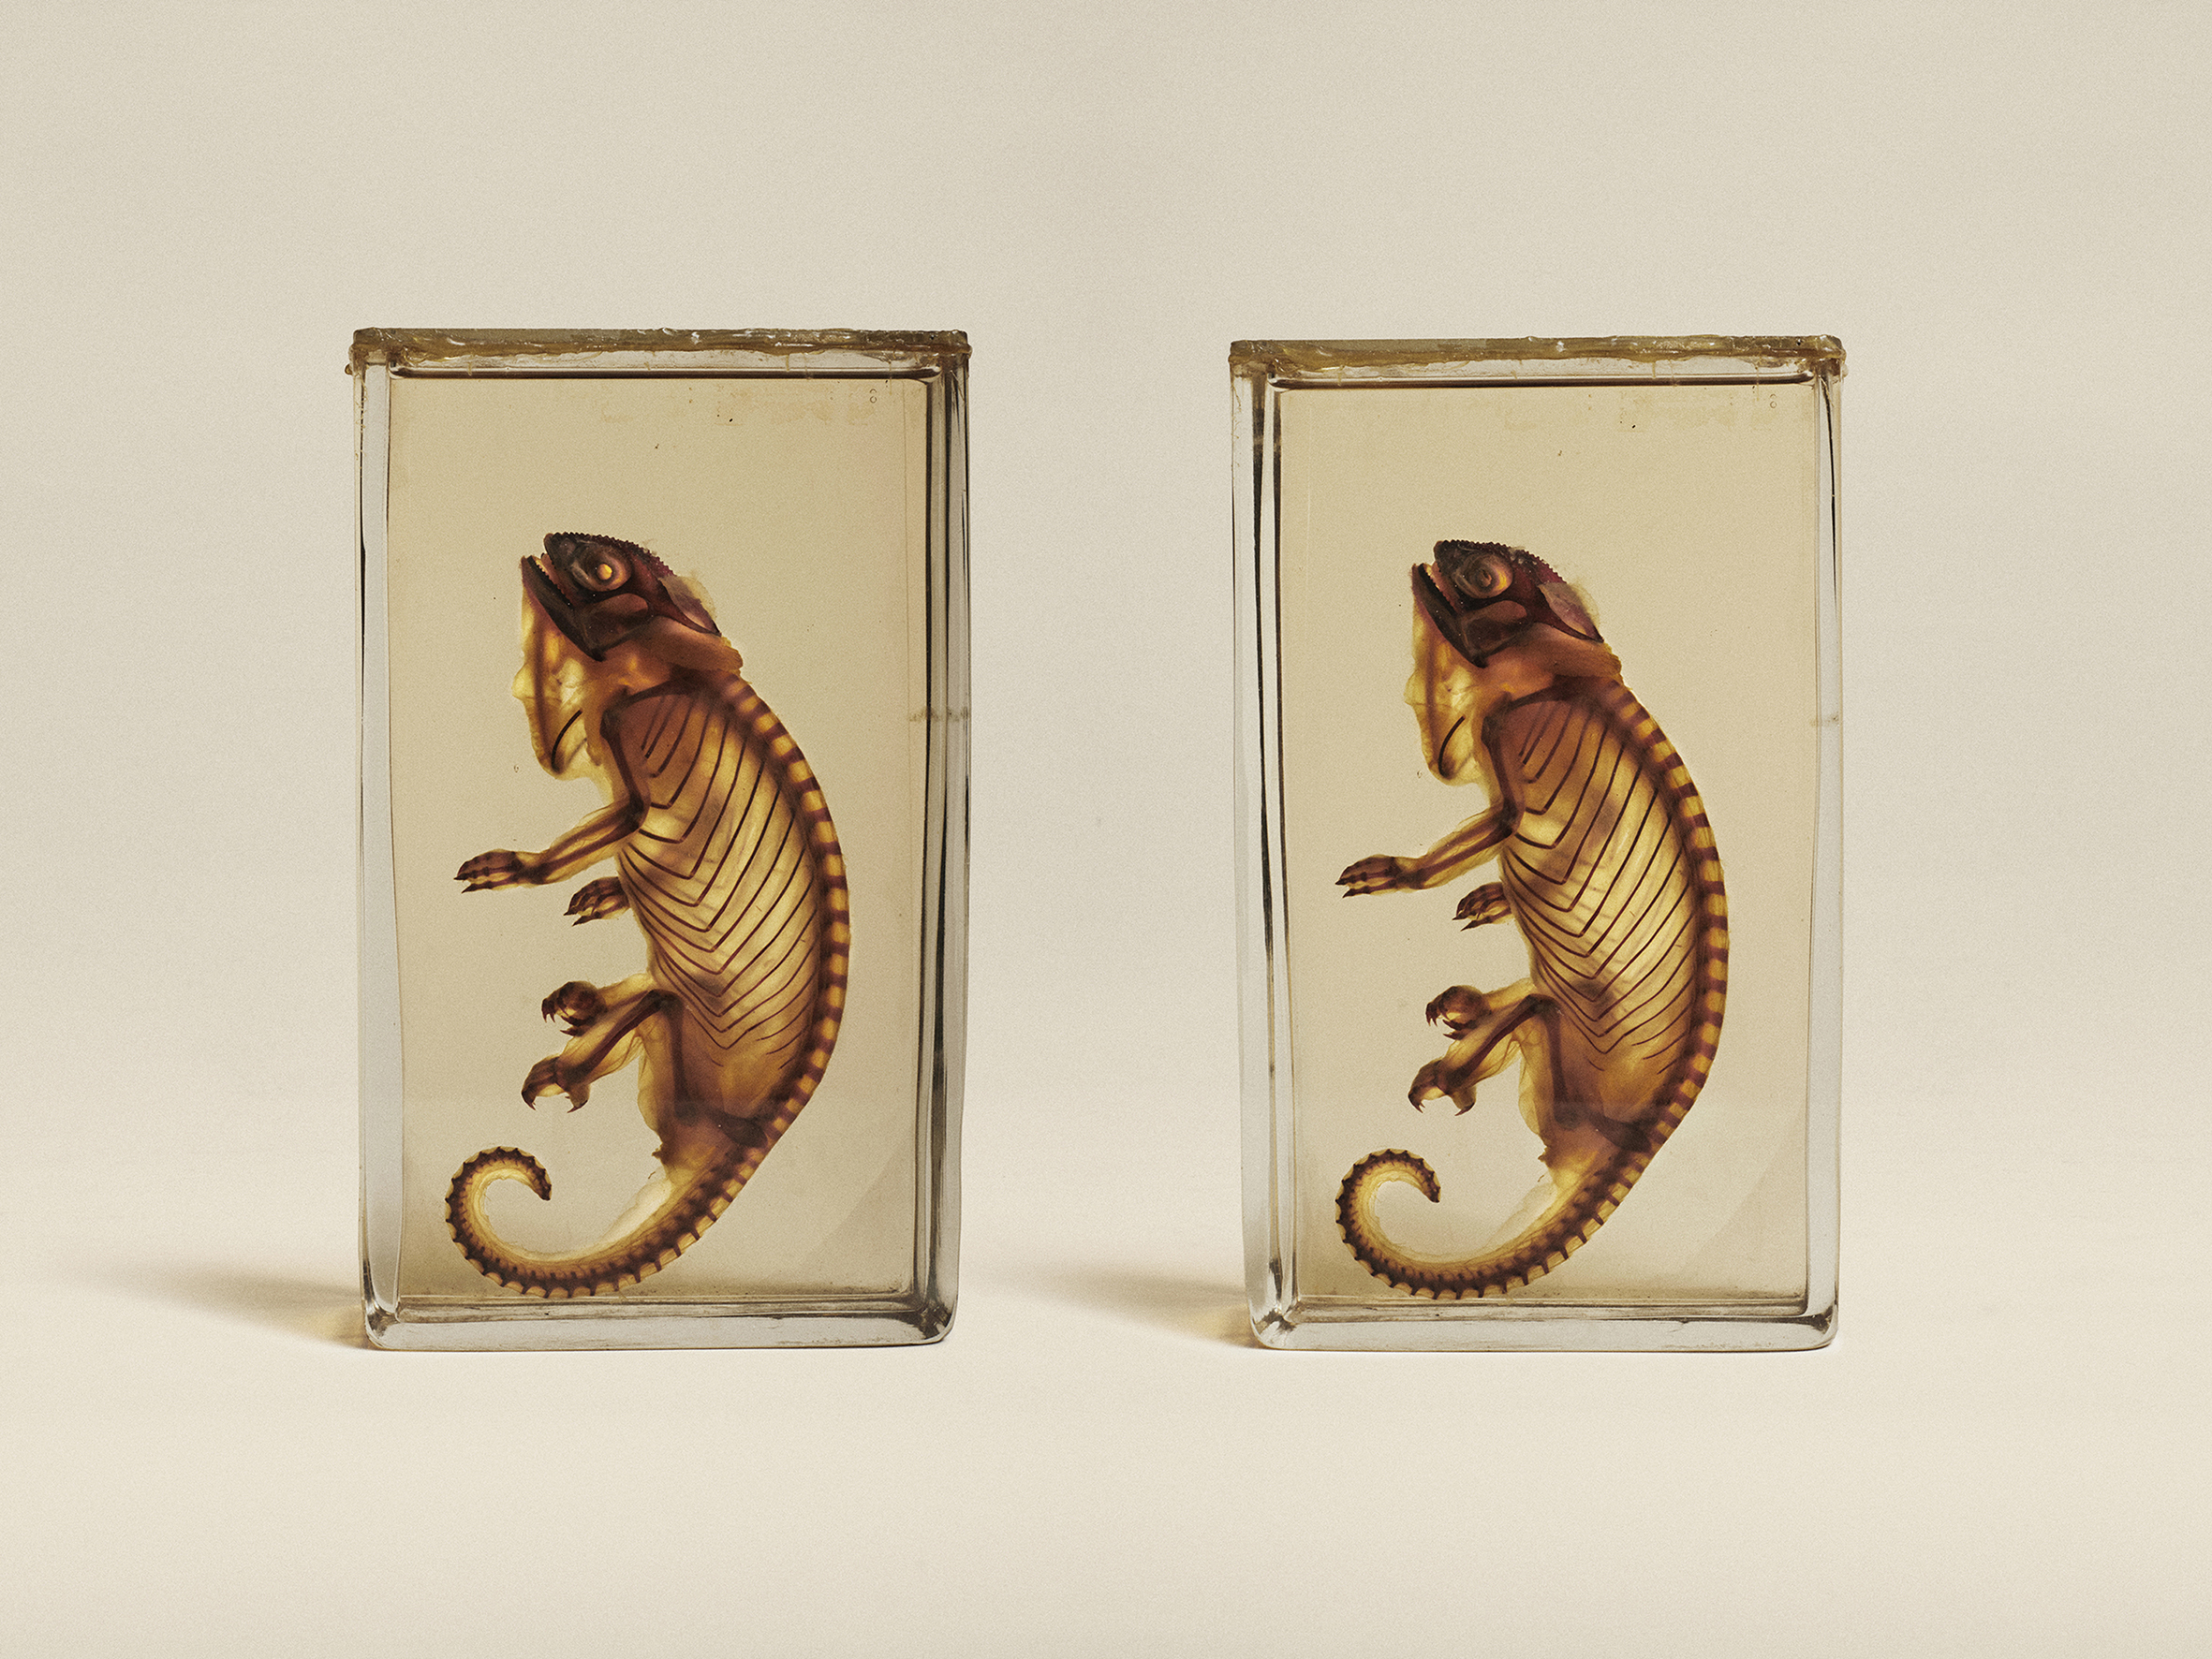 Animal Kingdom: Stereoscopic Images of Natural History at Manchester